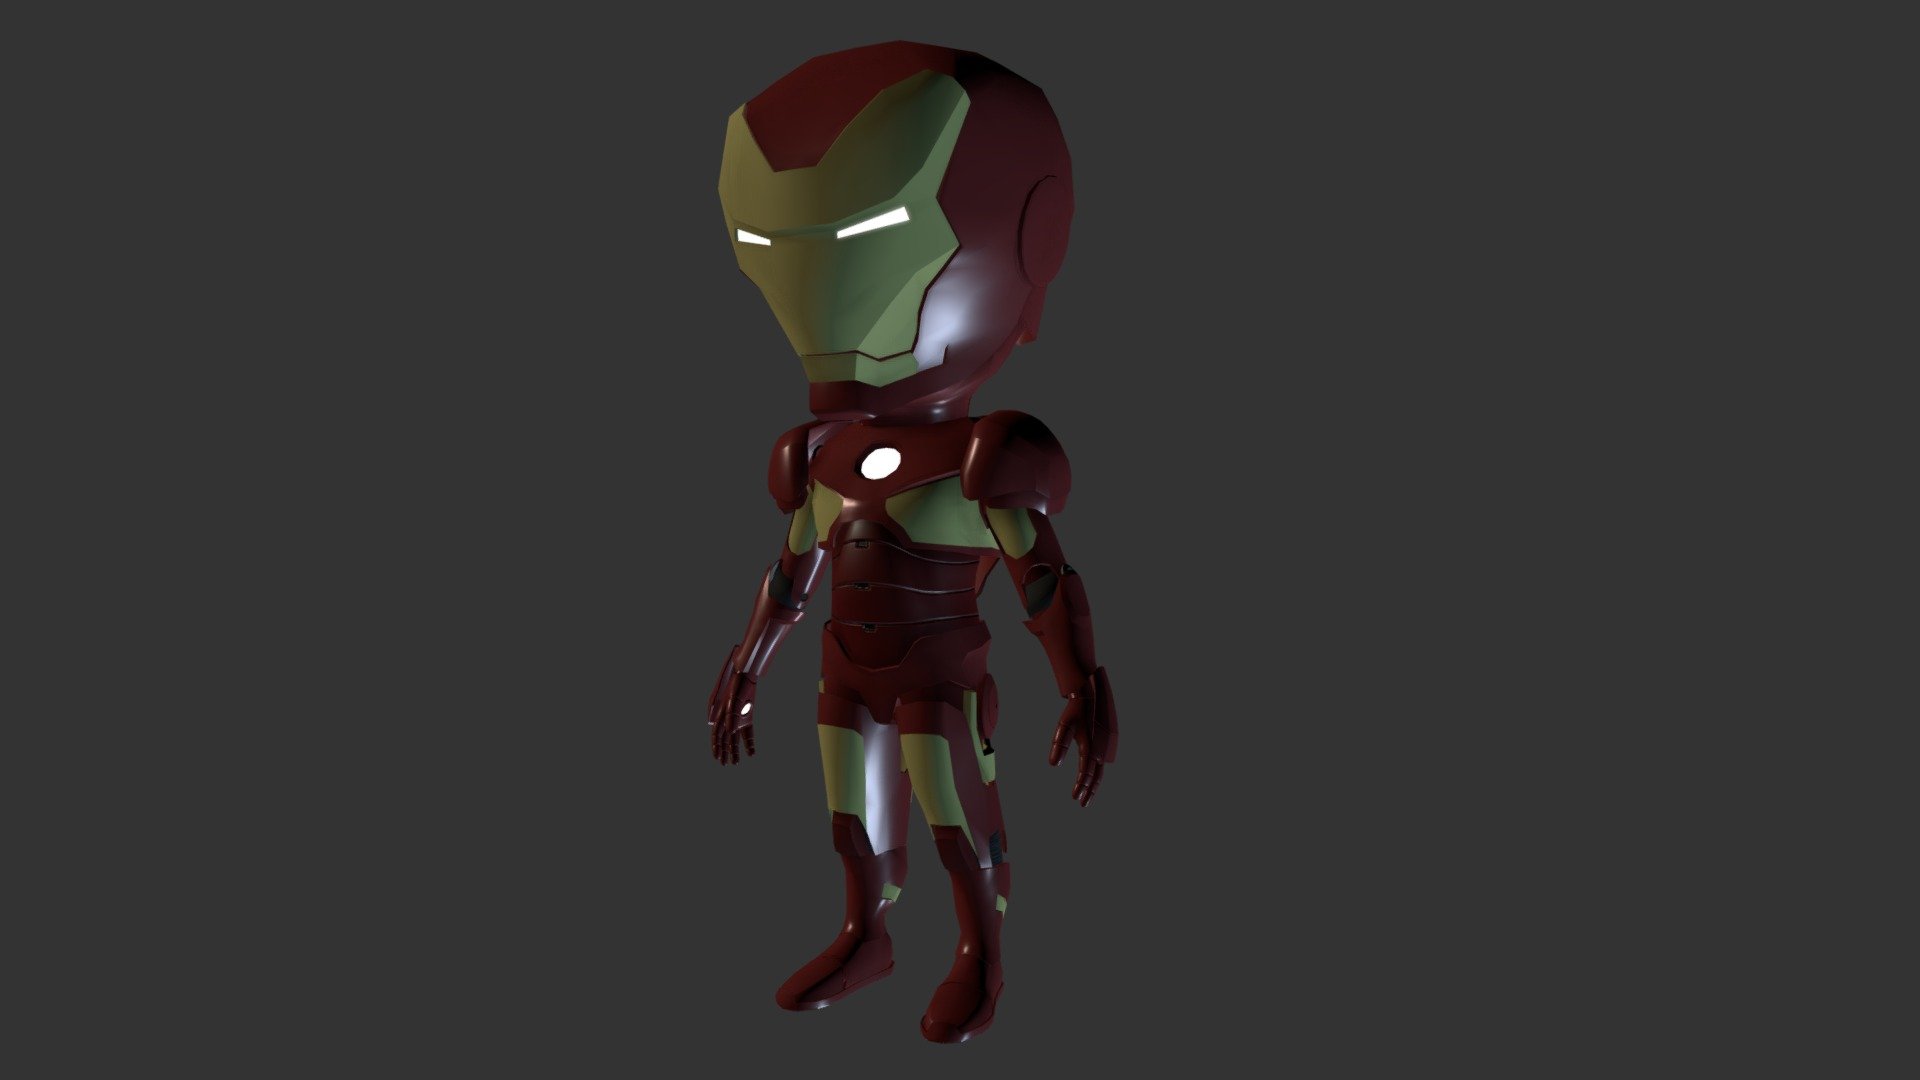 This 3d modeling is an Ironman chibi from an internal dummy - Iron Man Chibi - 3D model by AgustinDiazBarroso 3d model